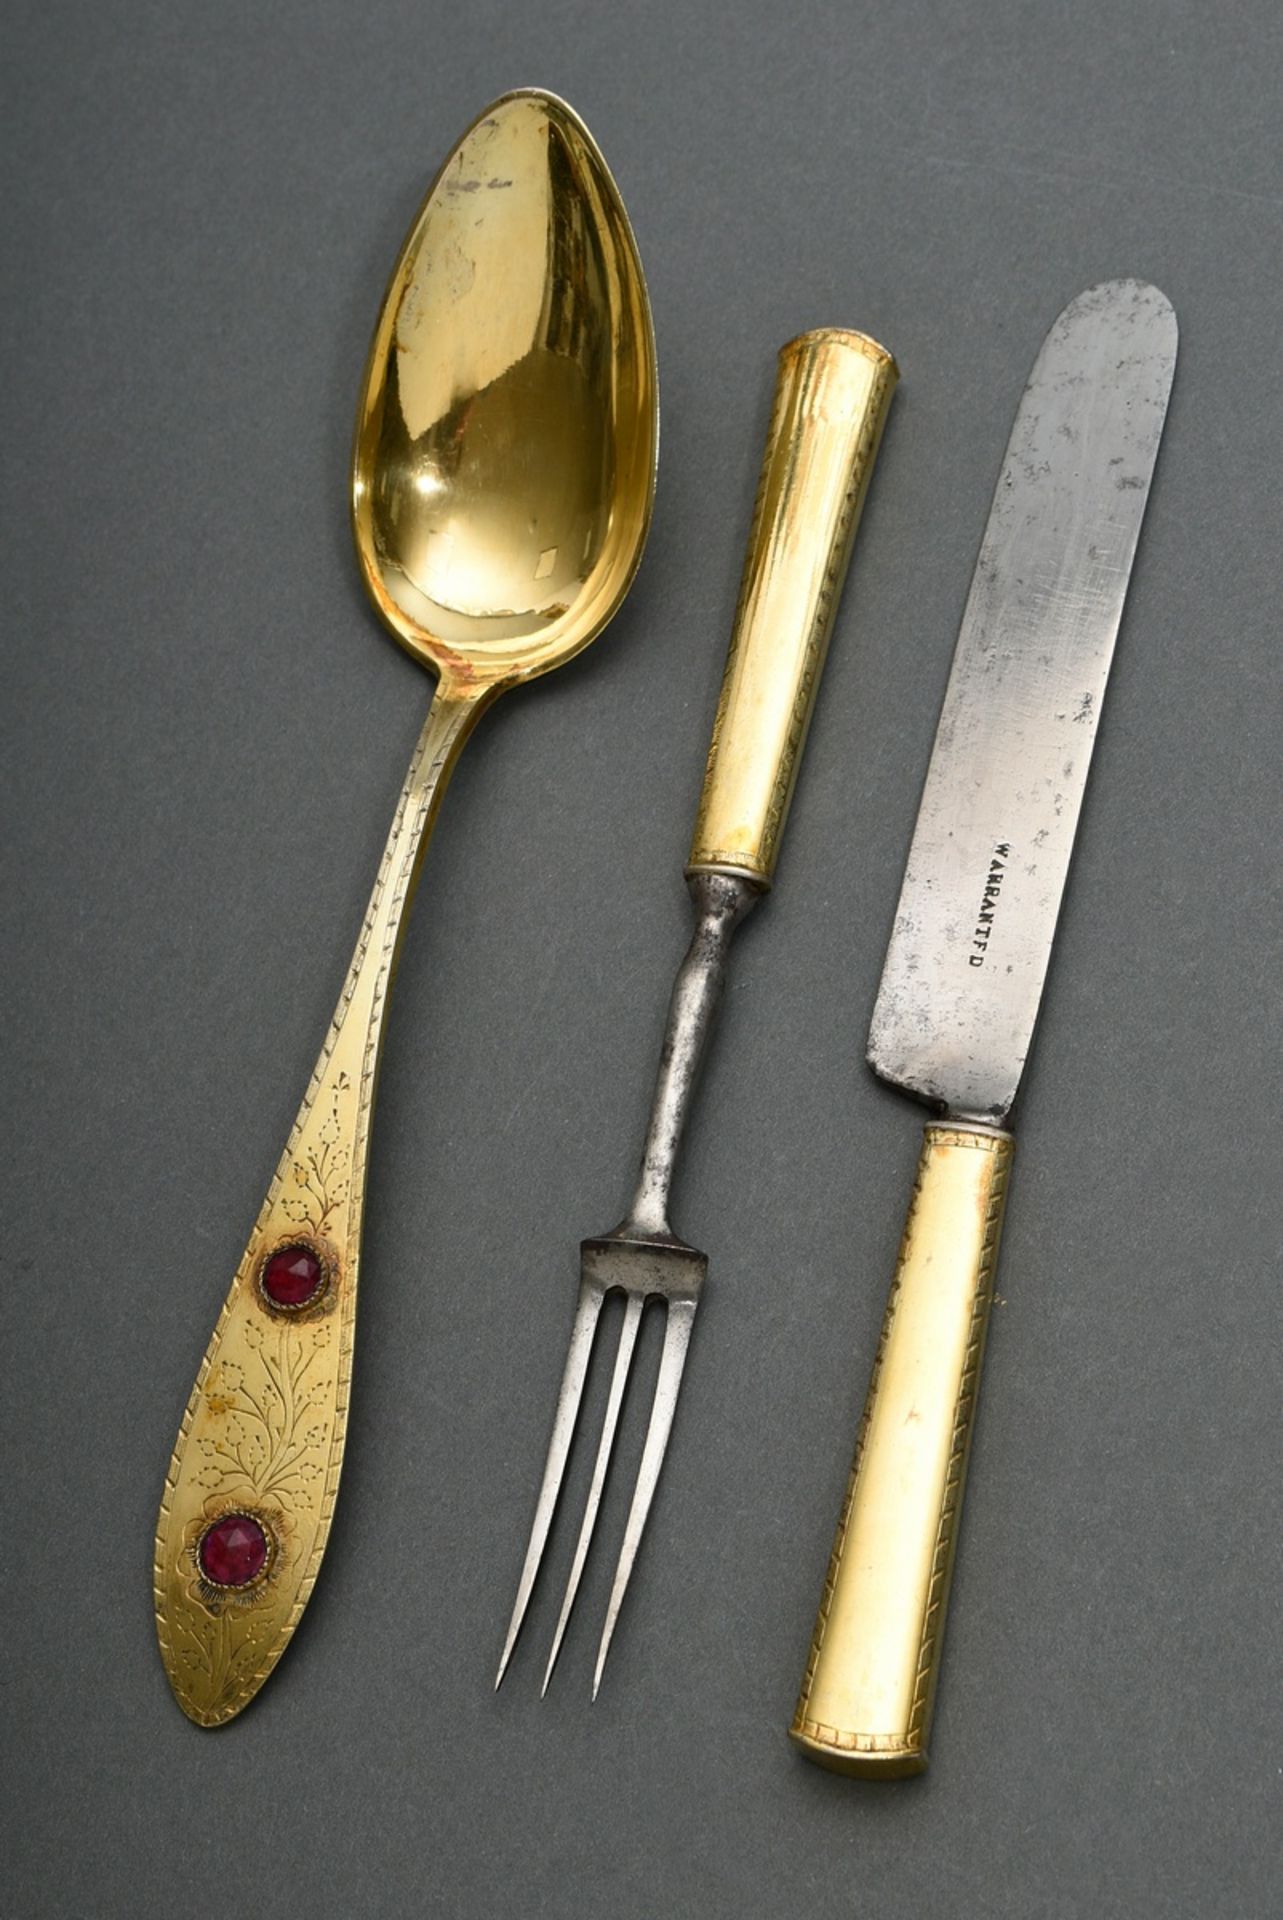 3 Pieces of antique travelling cutlery in a hallmarked leather case, consisting of: knife and fork  - Image 7 of 7